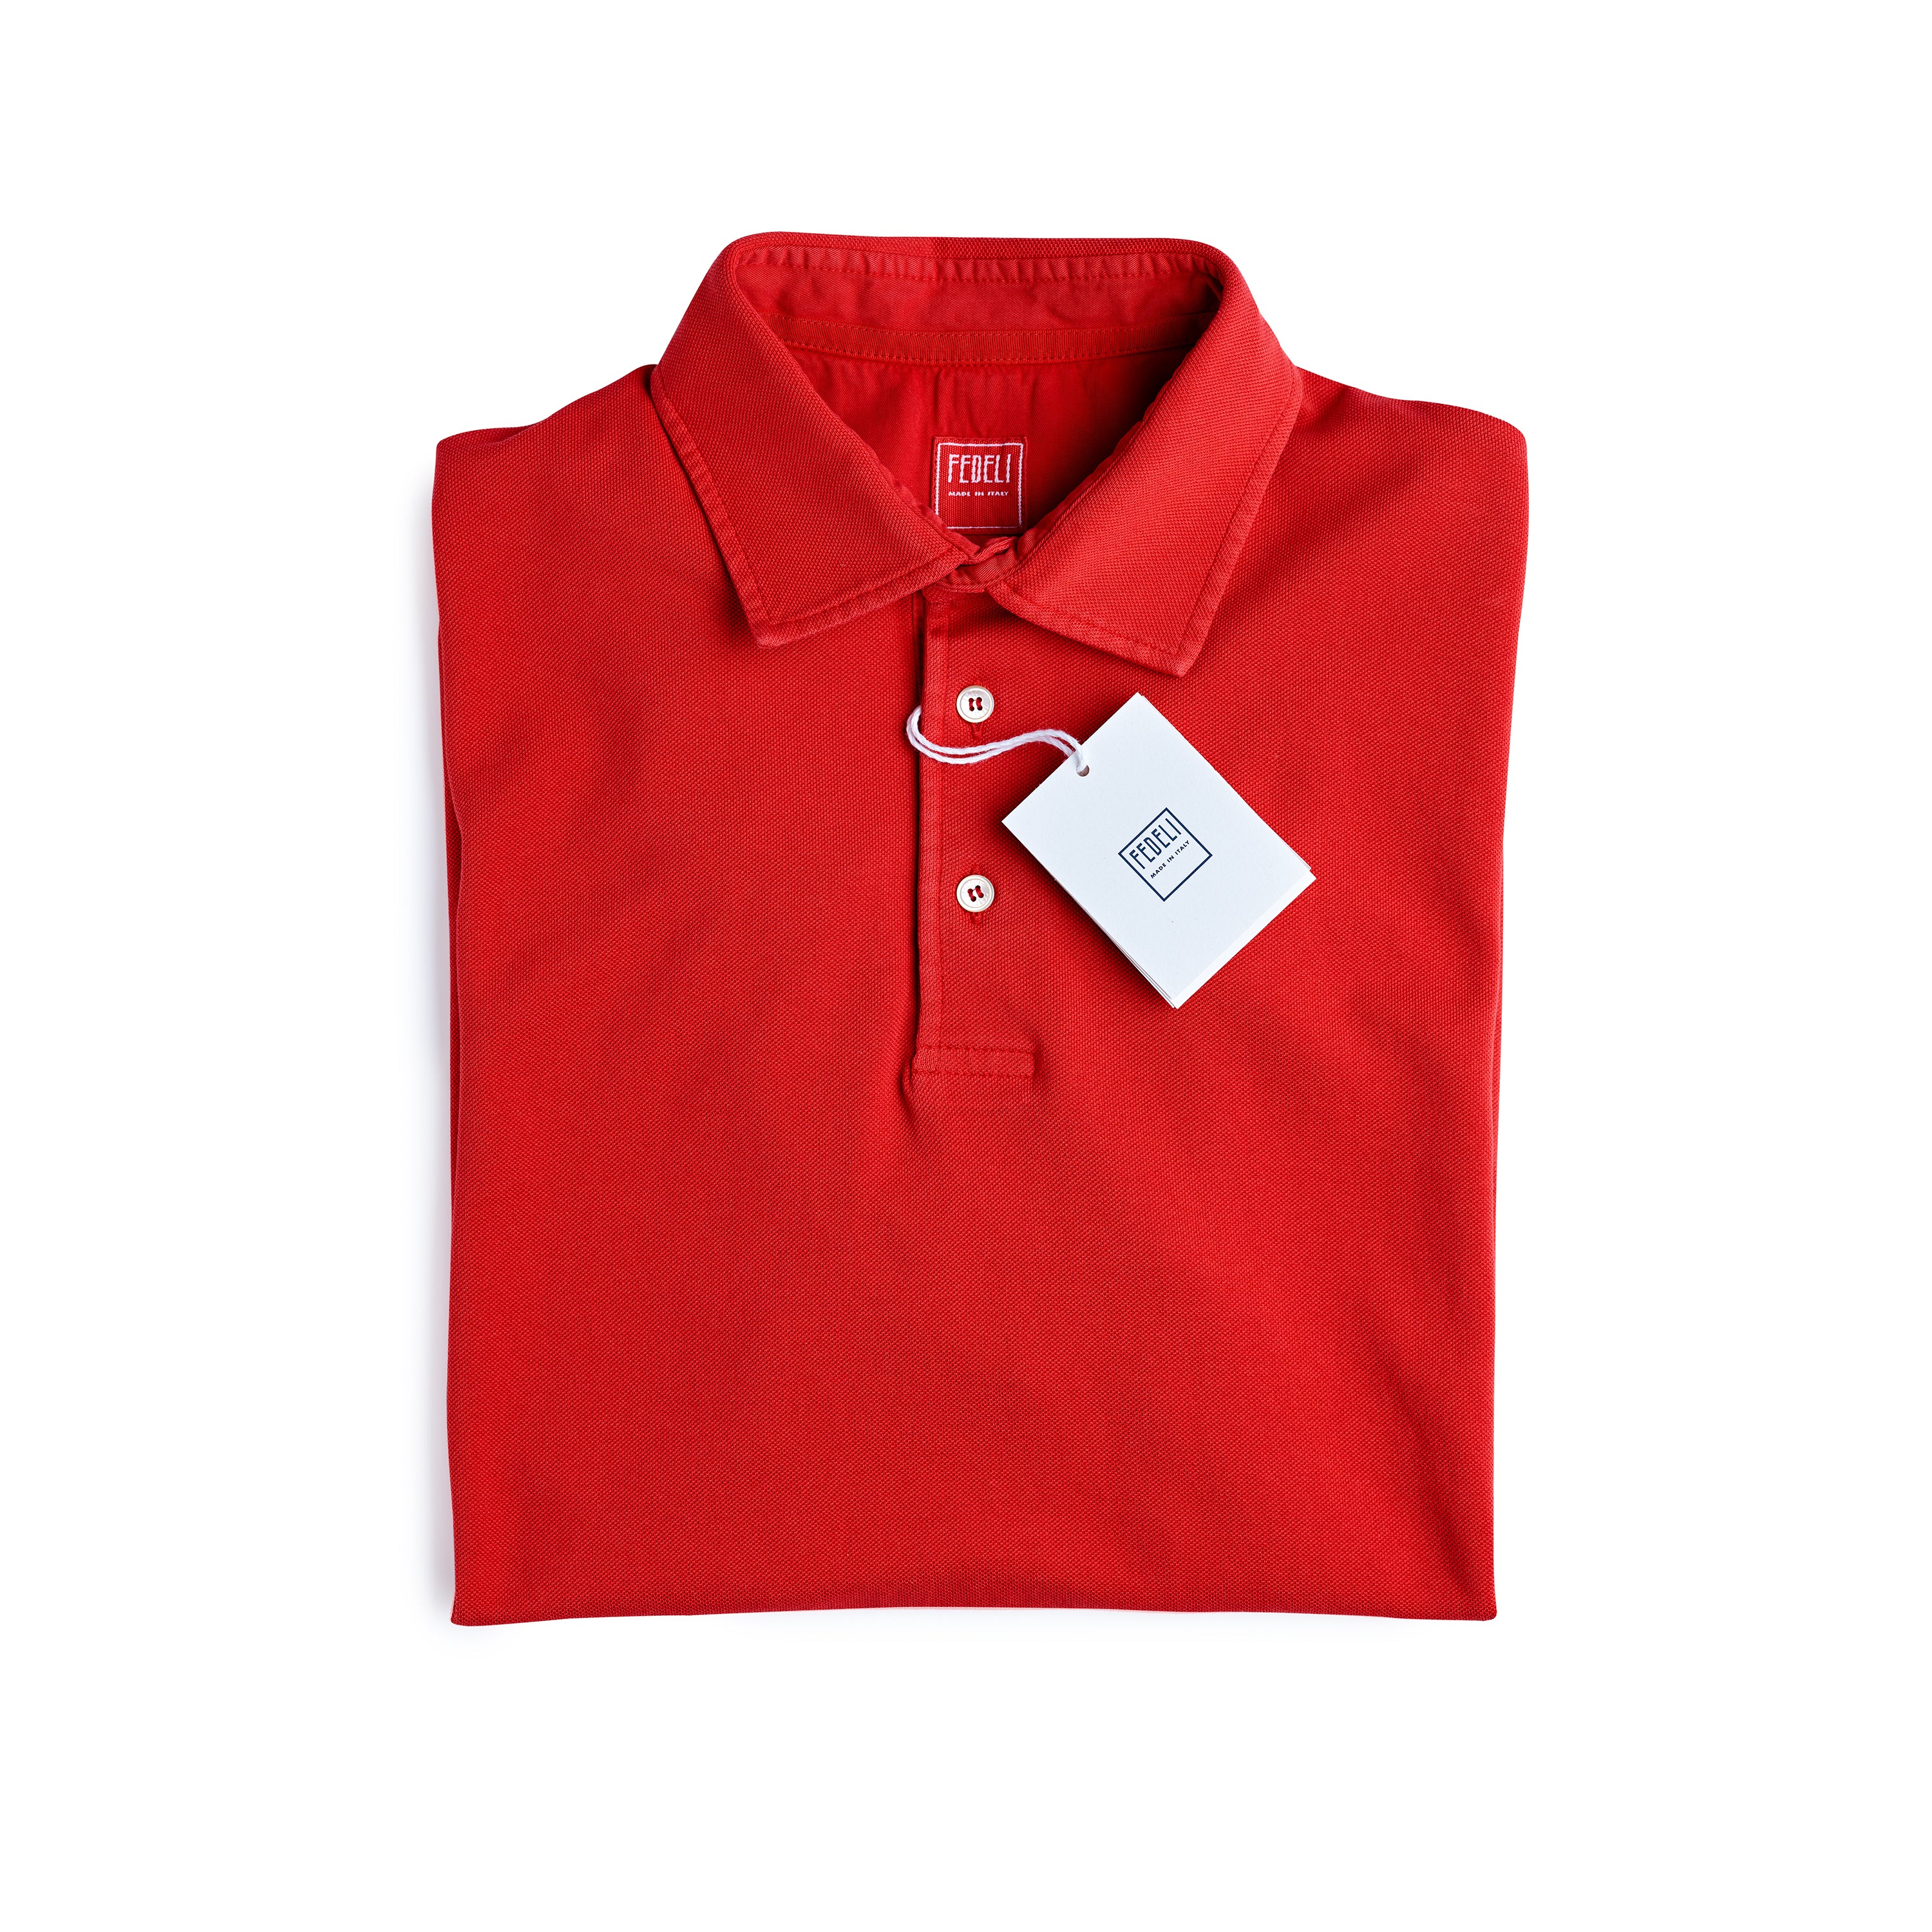 Fedeli Classic Short Sleeve Knitted Pique Polo Shirt Candy Apple Red